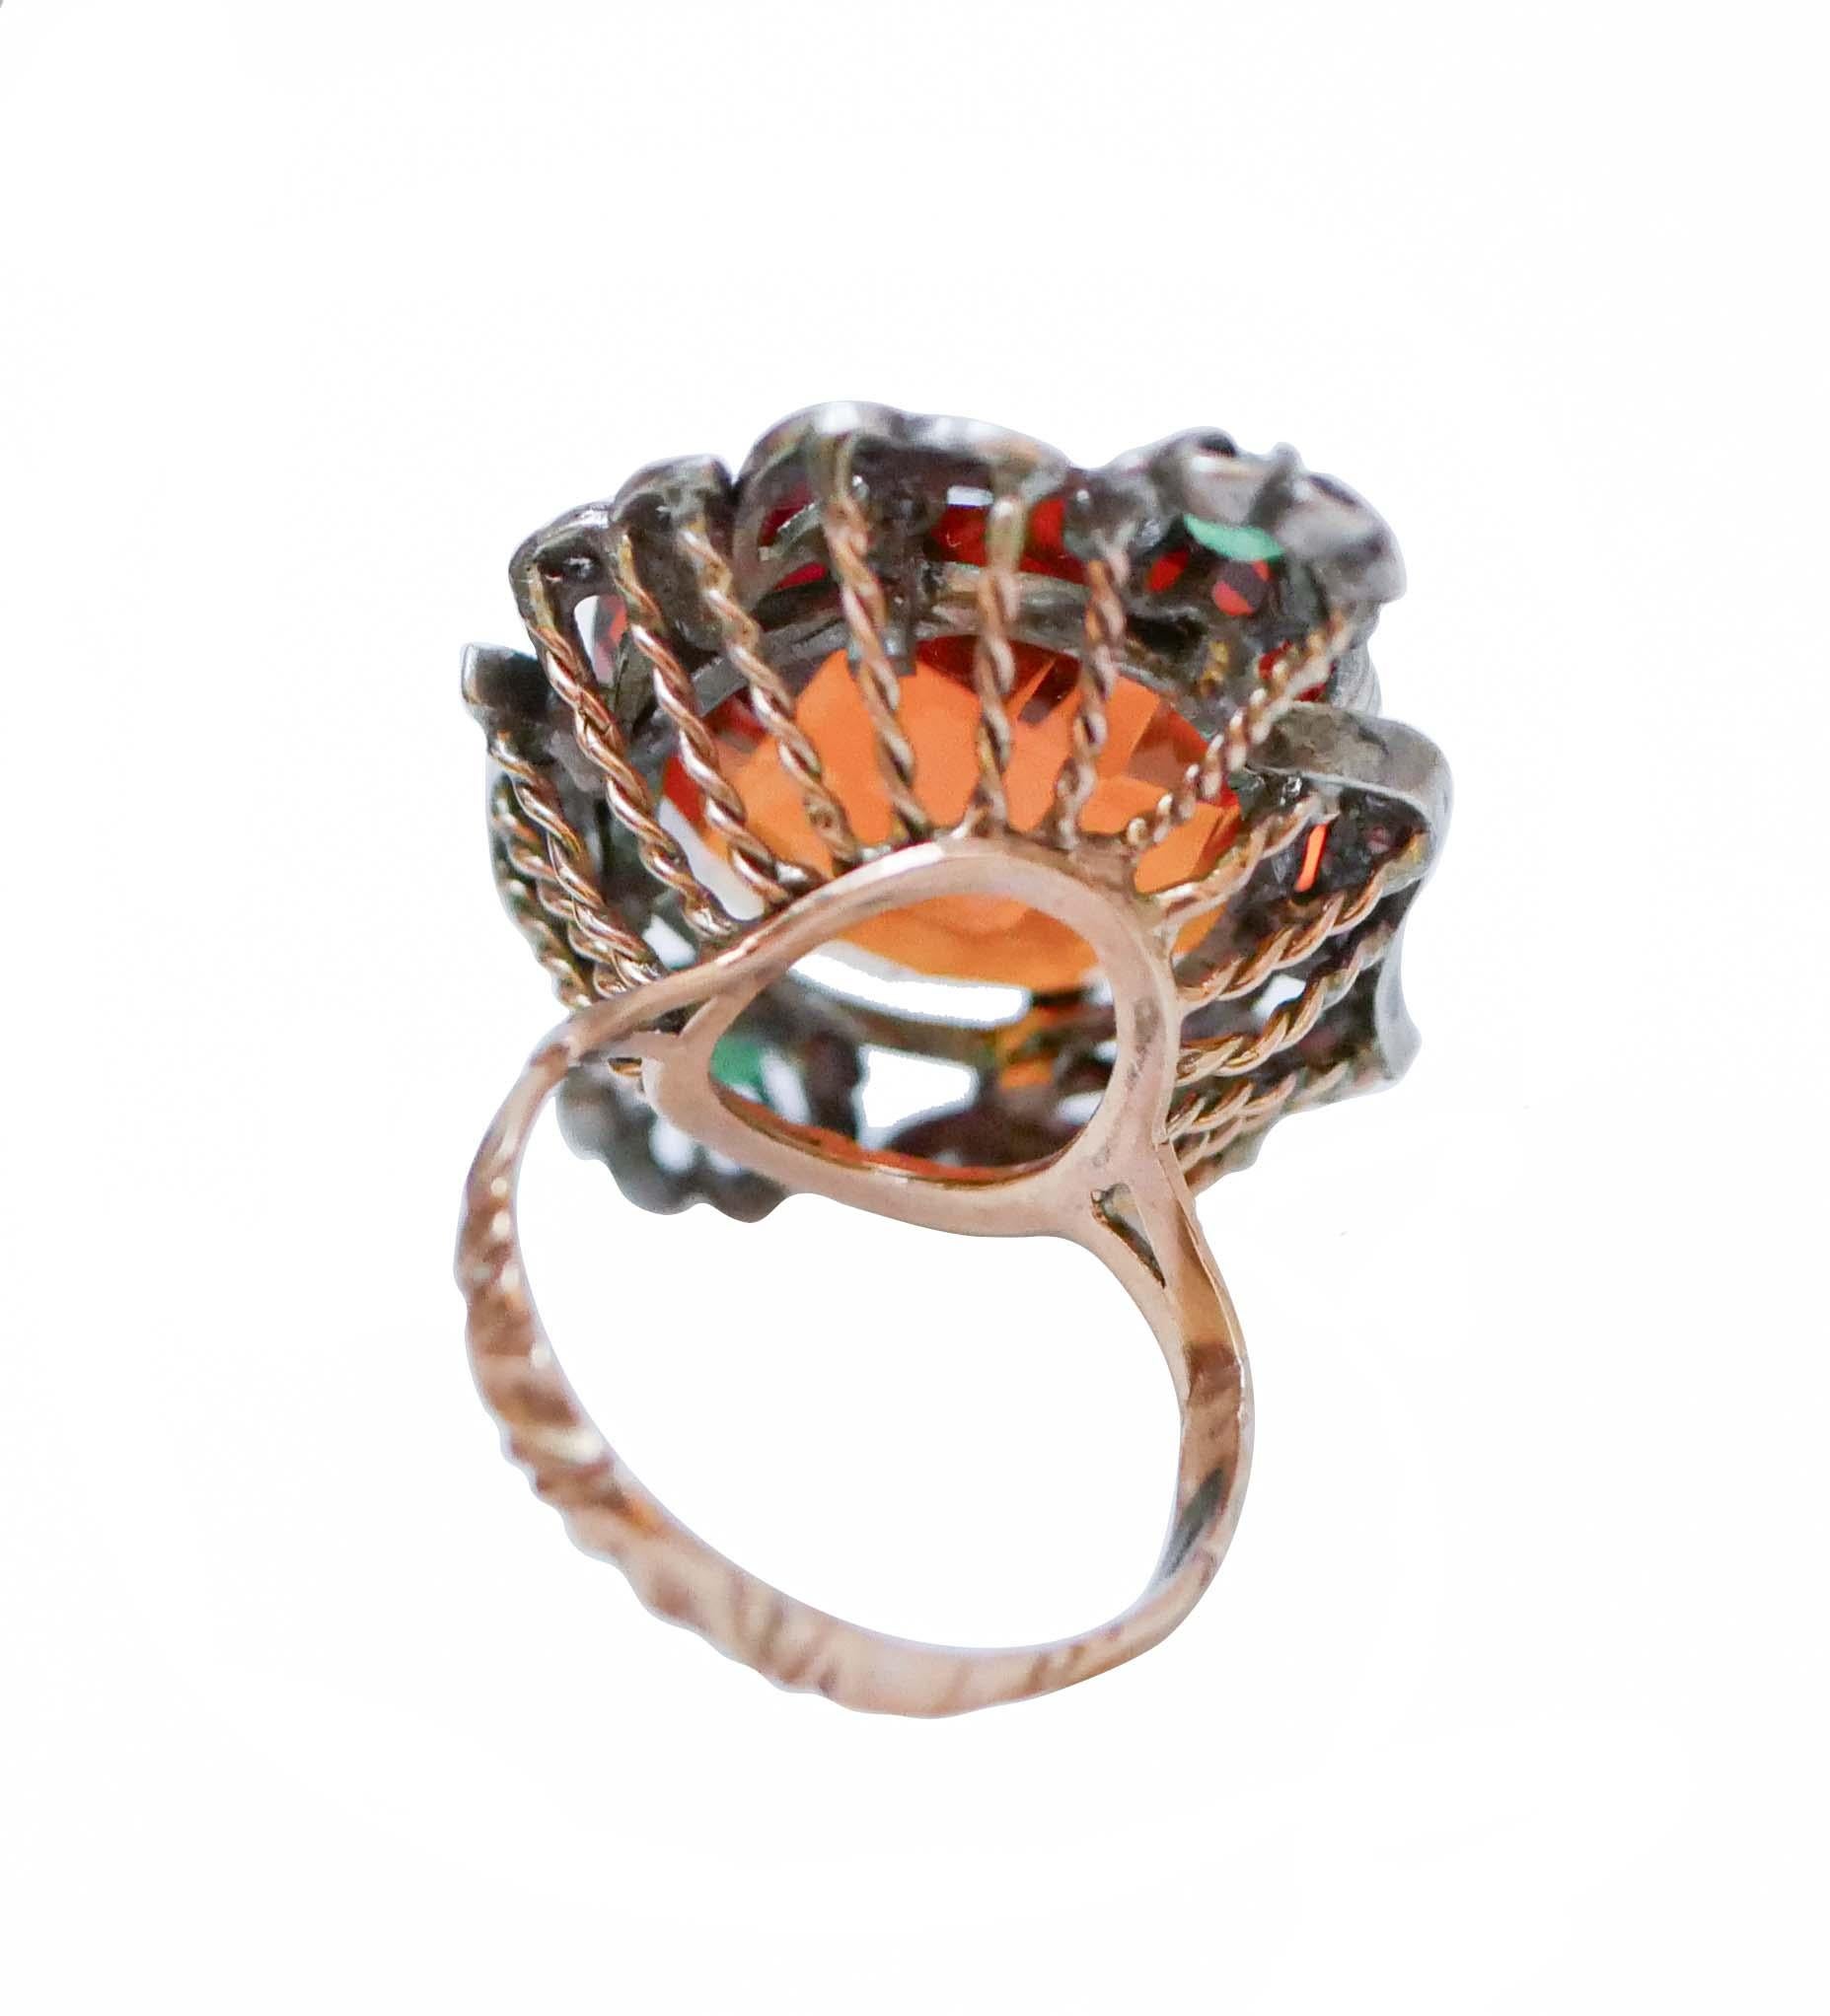 Retro Topaz, Emeralds, Rubies, Diamonds, Rose Gold and Silver Ring. For Sale